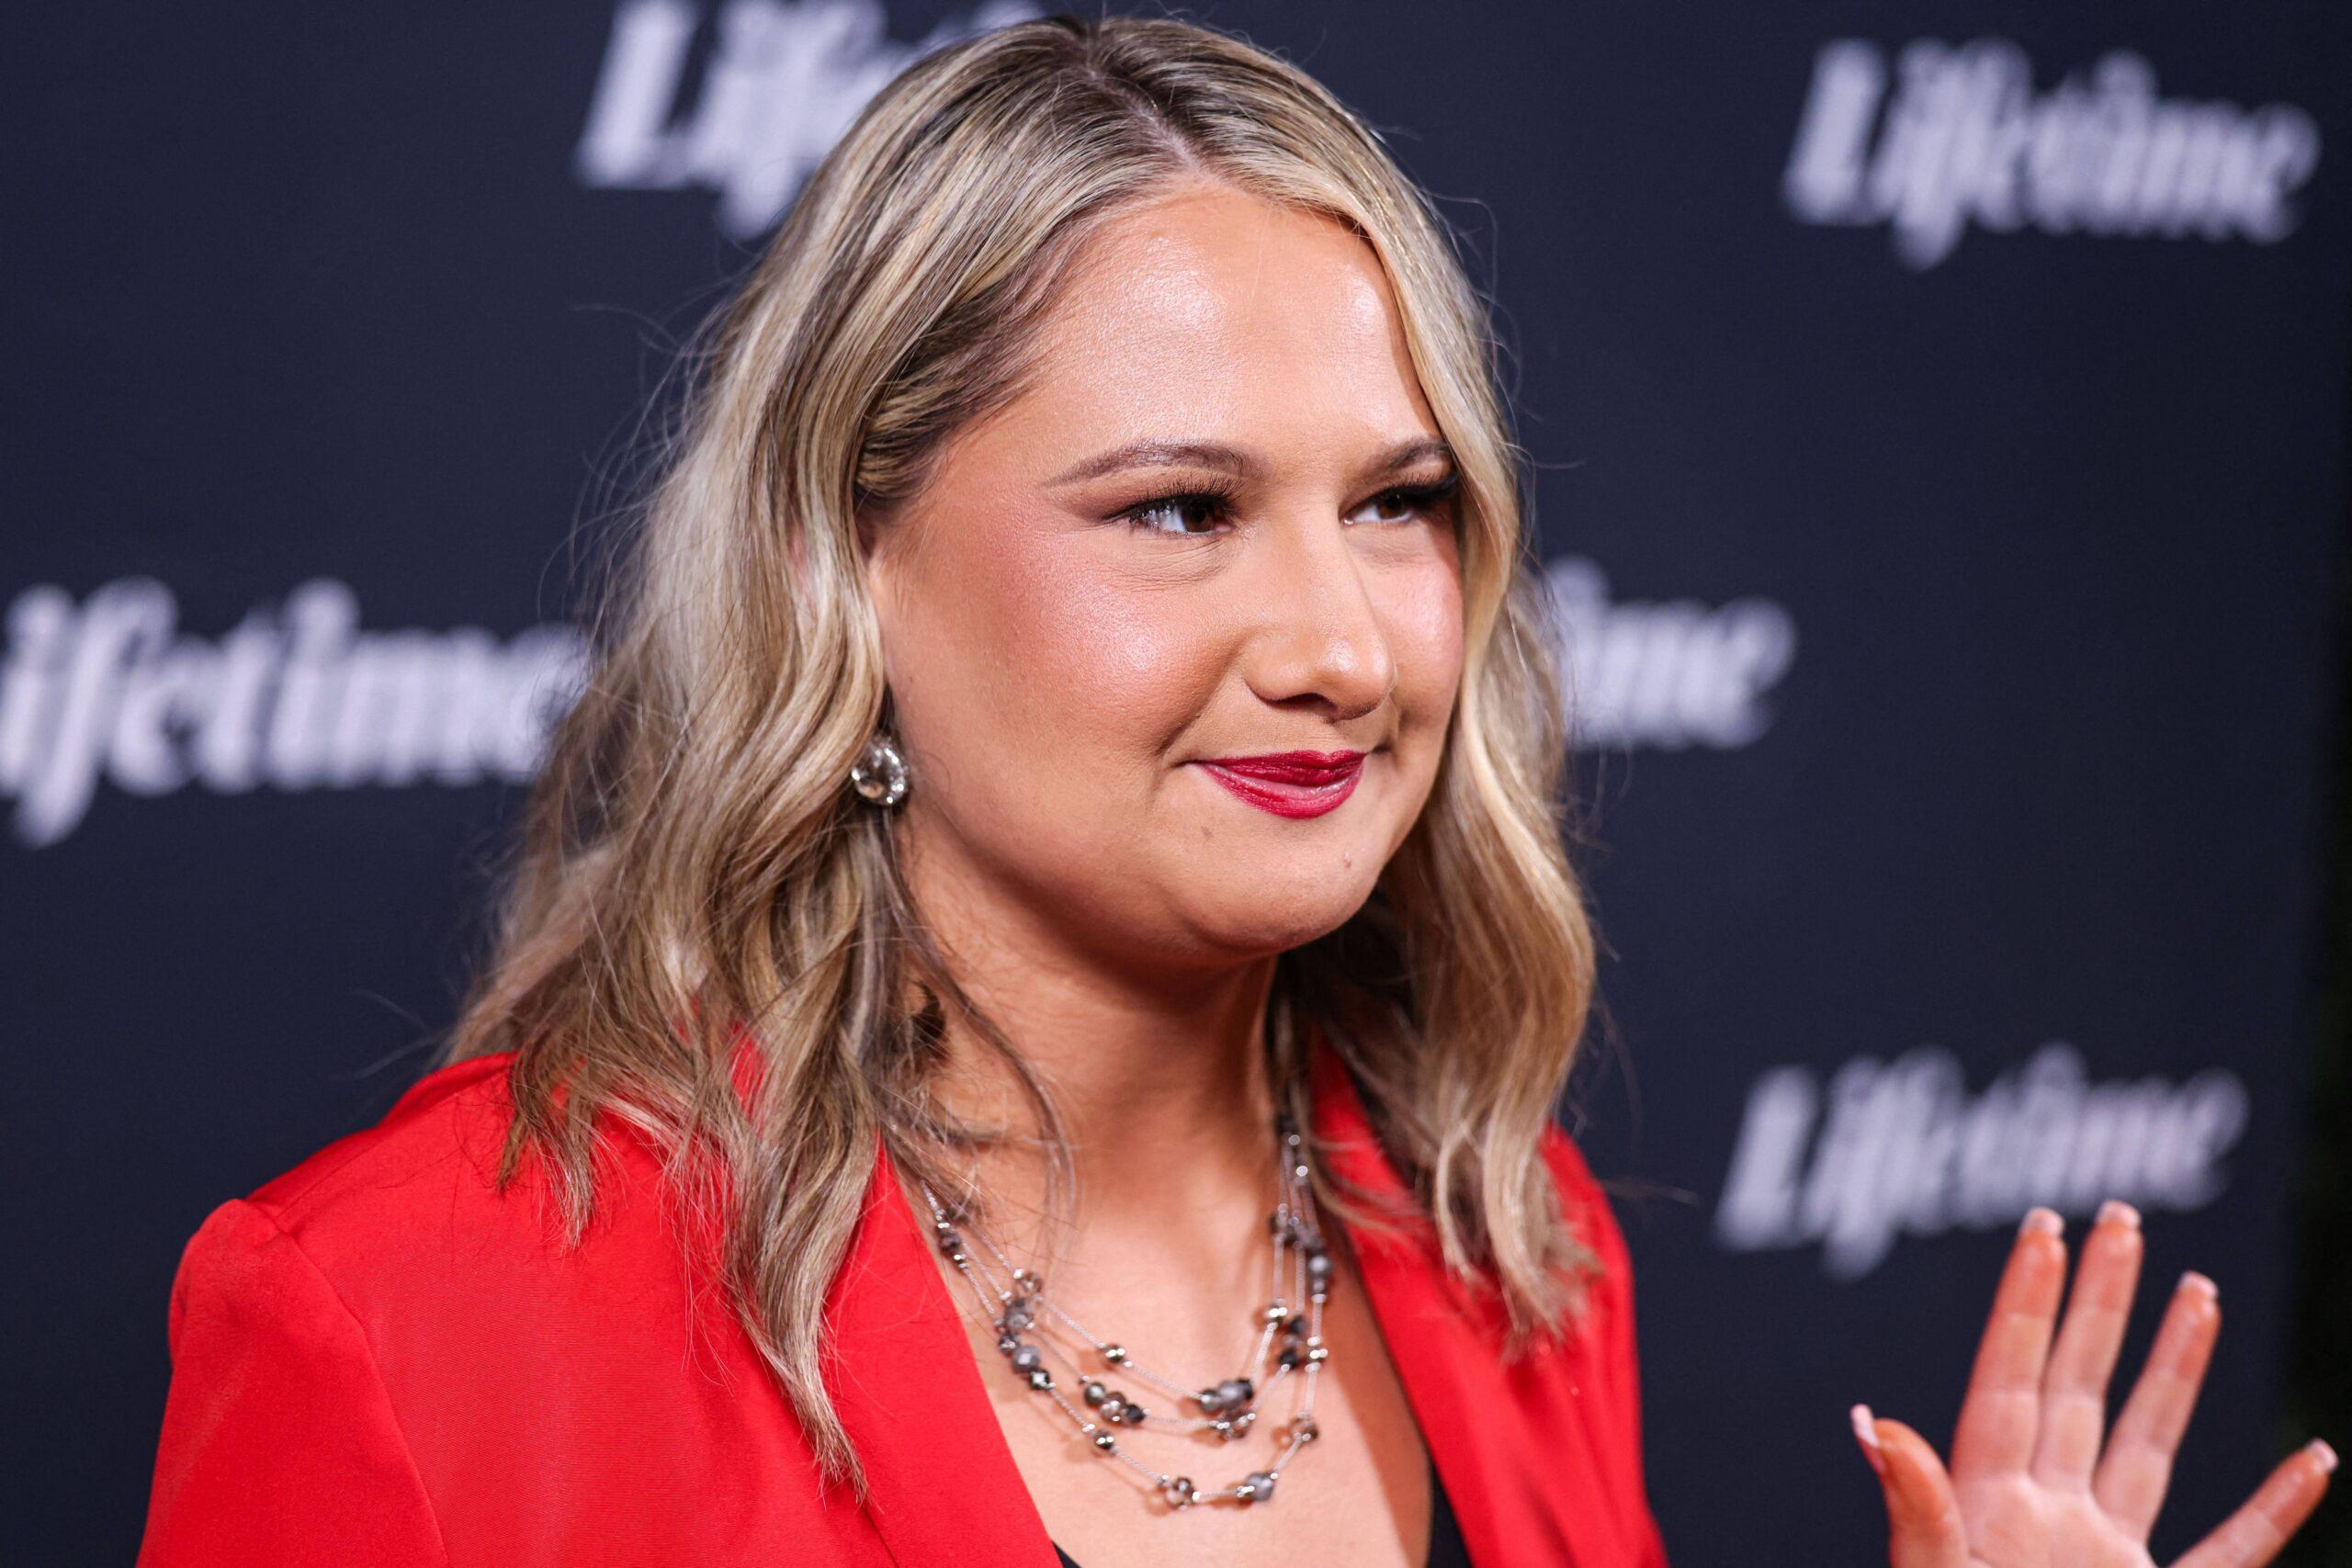 Gypsy Rose Blanchard Says The Media Has Had A 'Negative Effect' On Her Mental Health